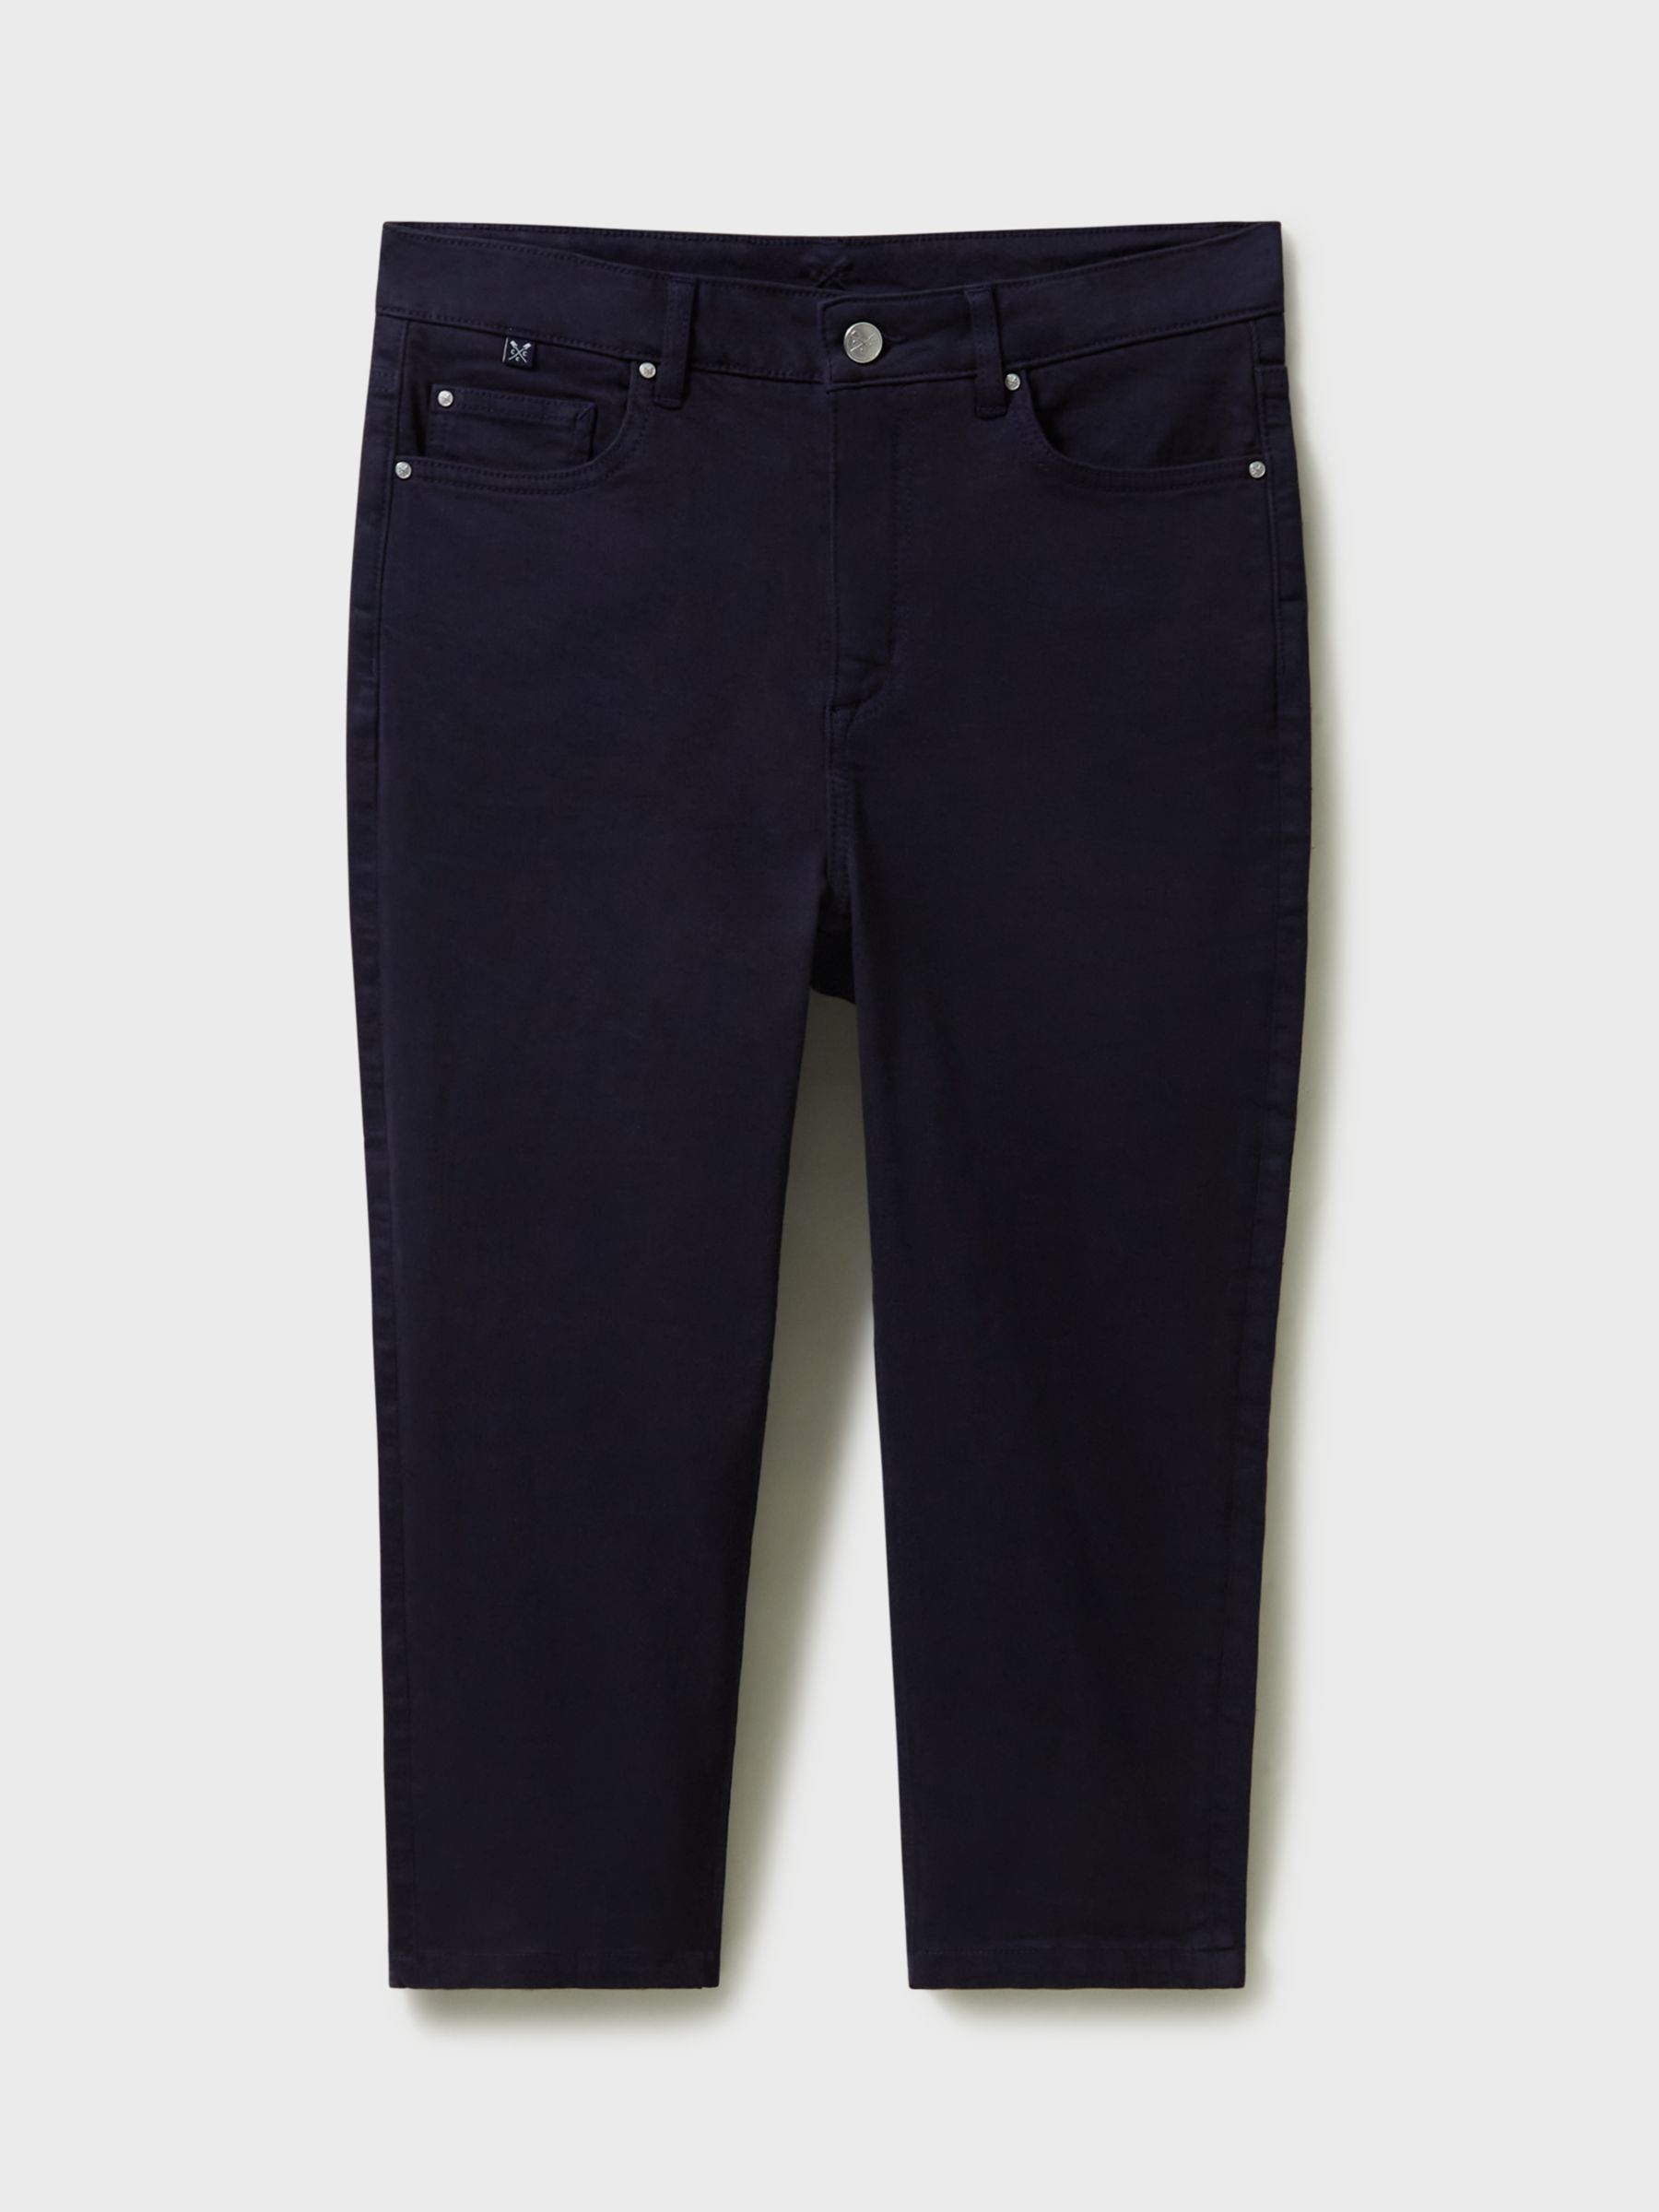 Buy Crew Clothing Mia Cropped Jeans Online at johnlewis.com